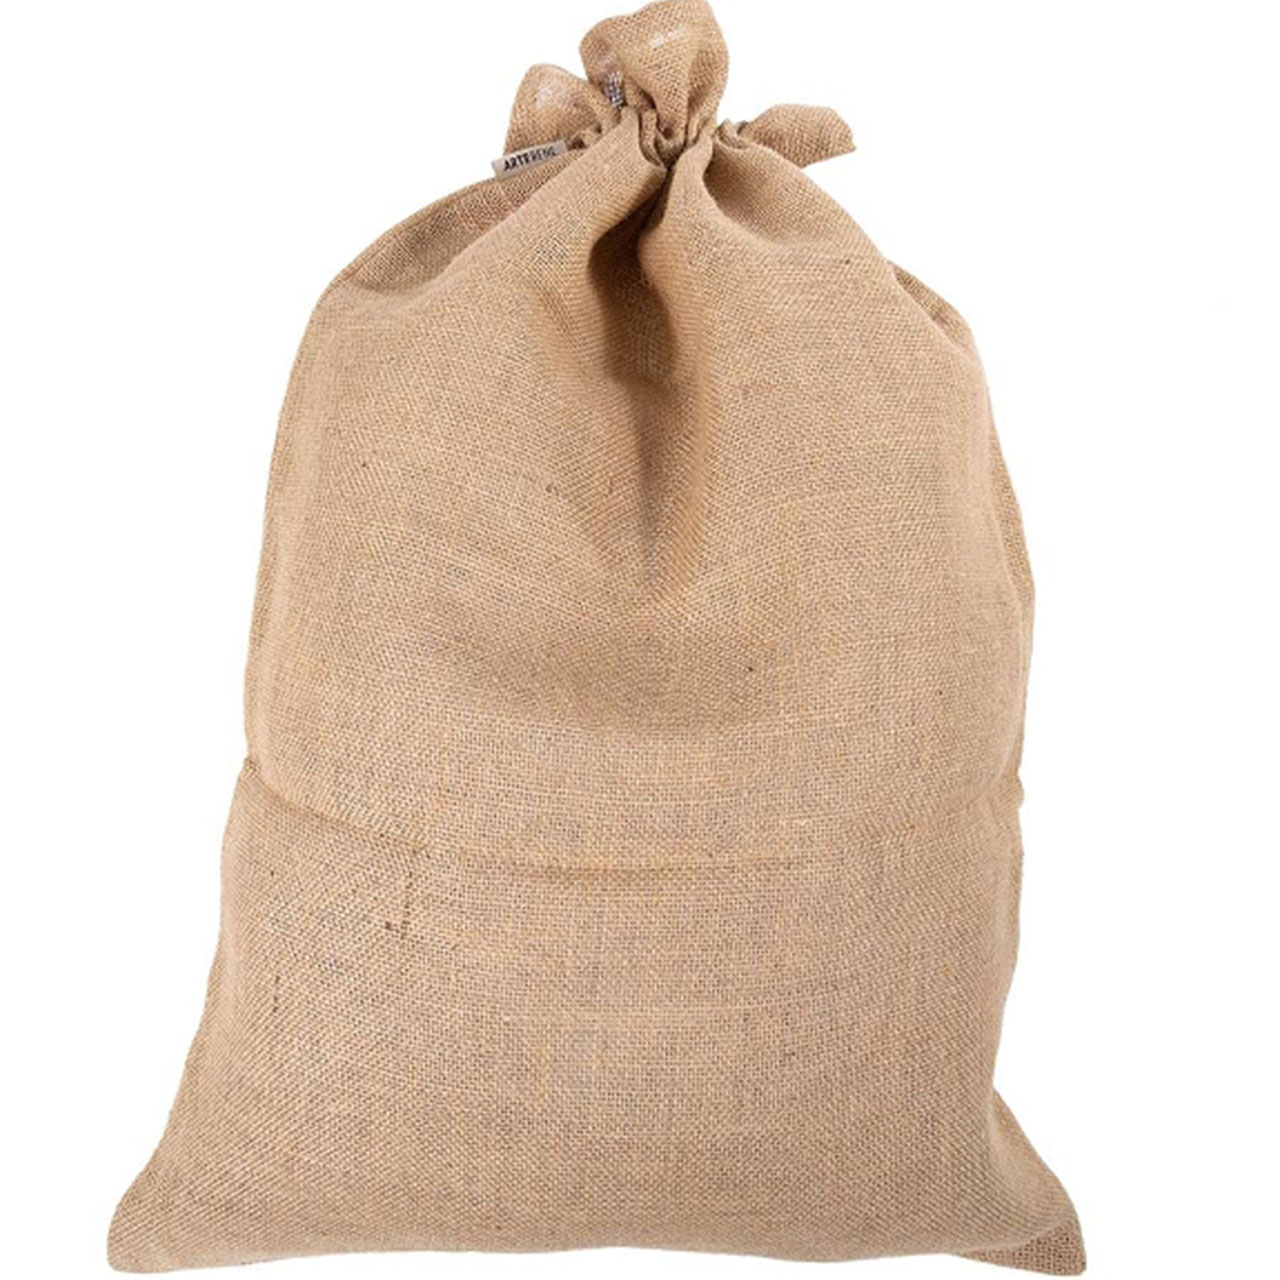 Jute Sack - Driving Home for Xmas (XL)